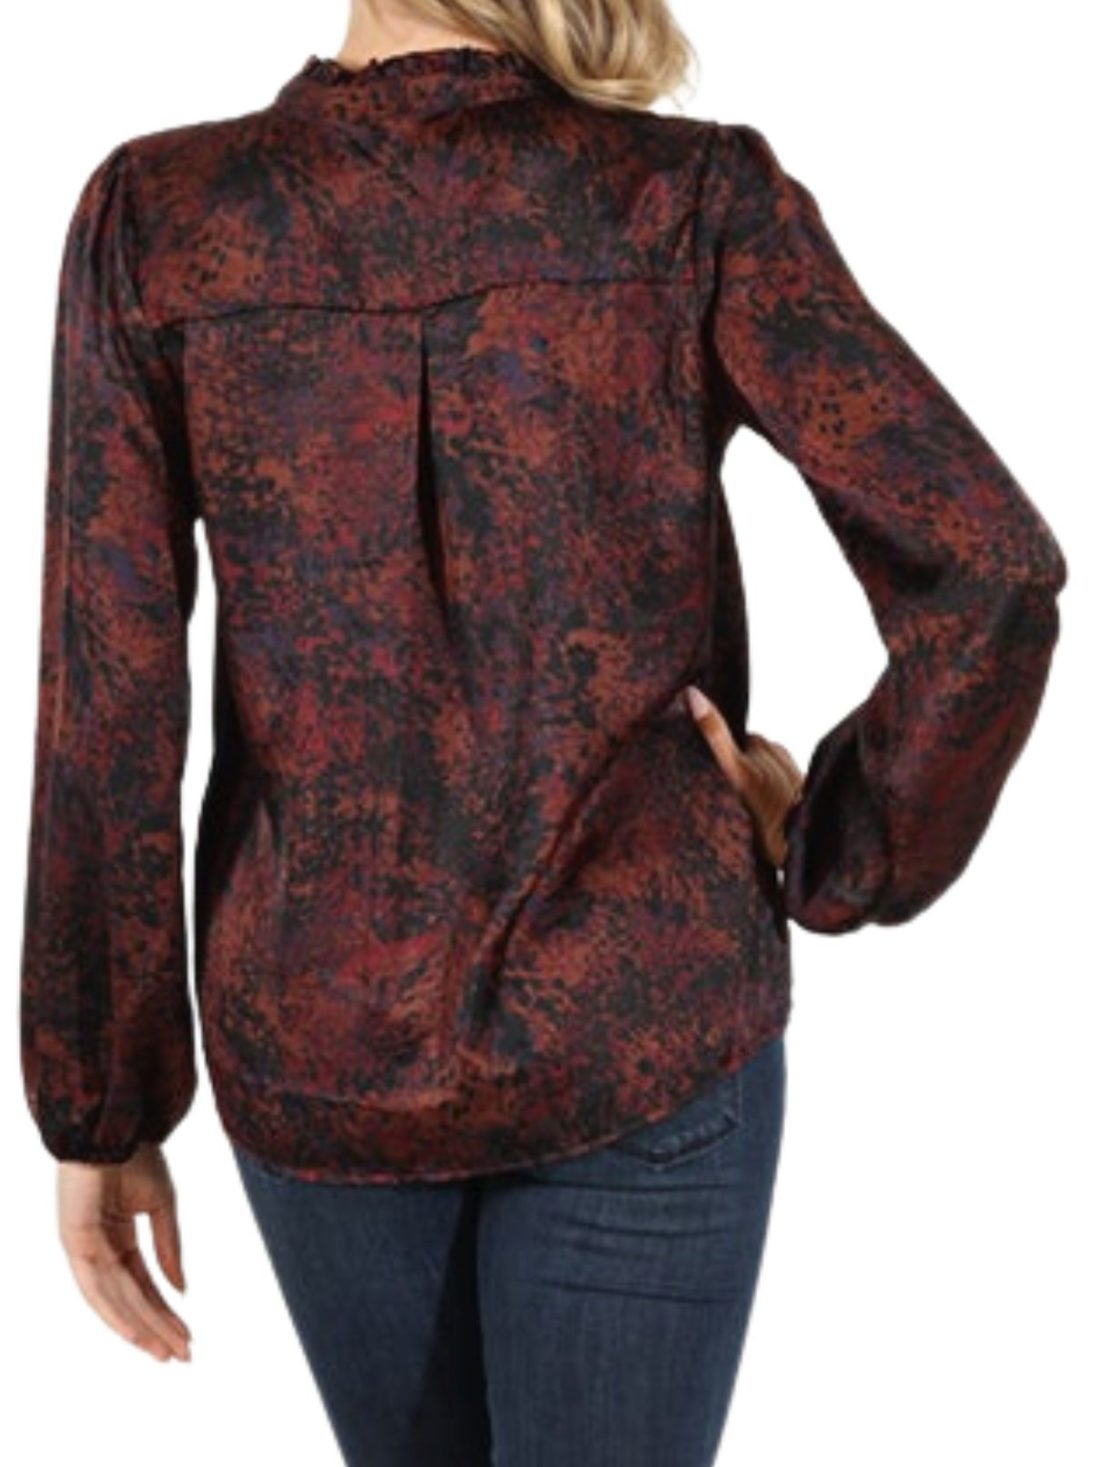 veronica m tie neck blouse in randall print